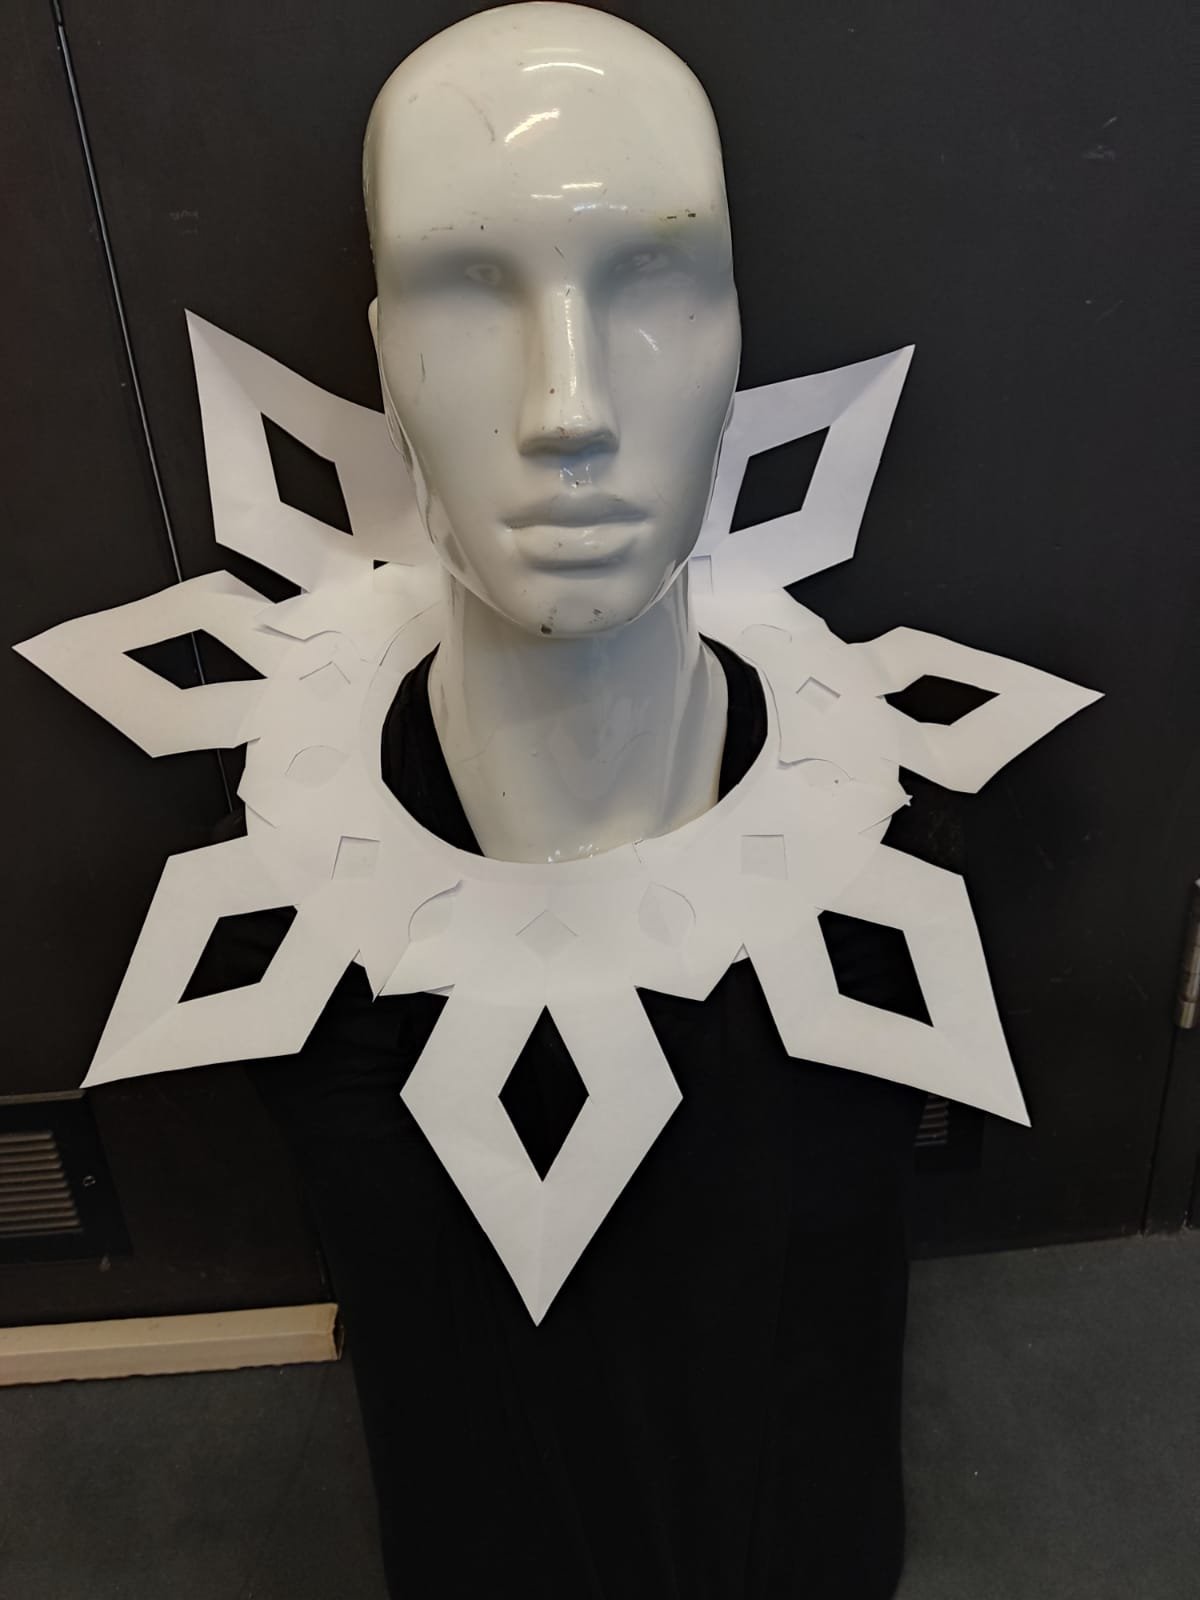 The finished snowflake collar modelled on a mannequin